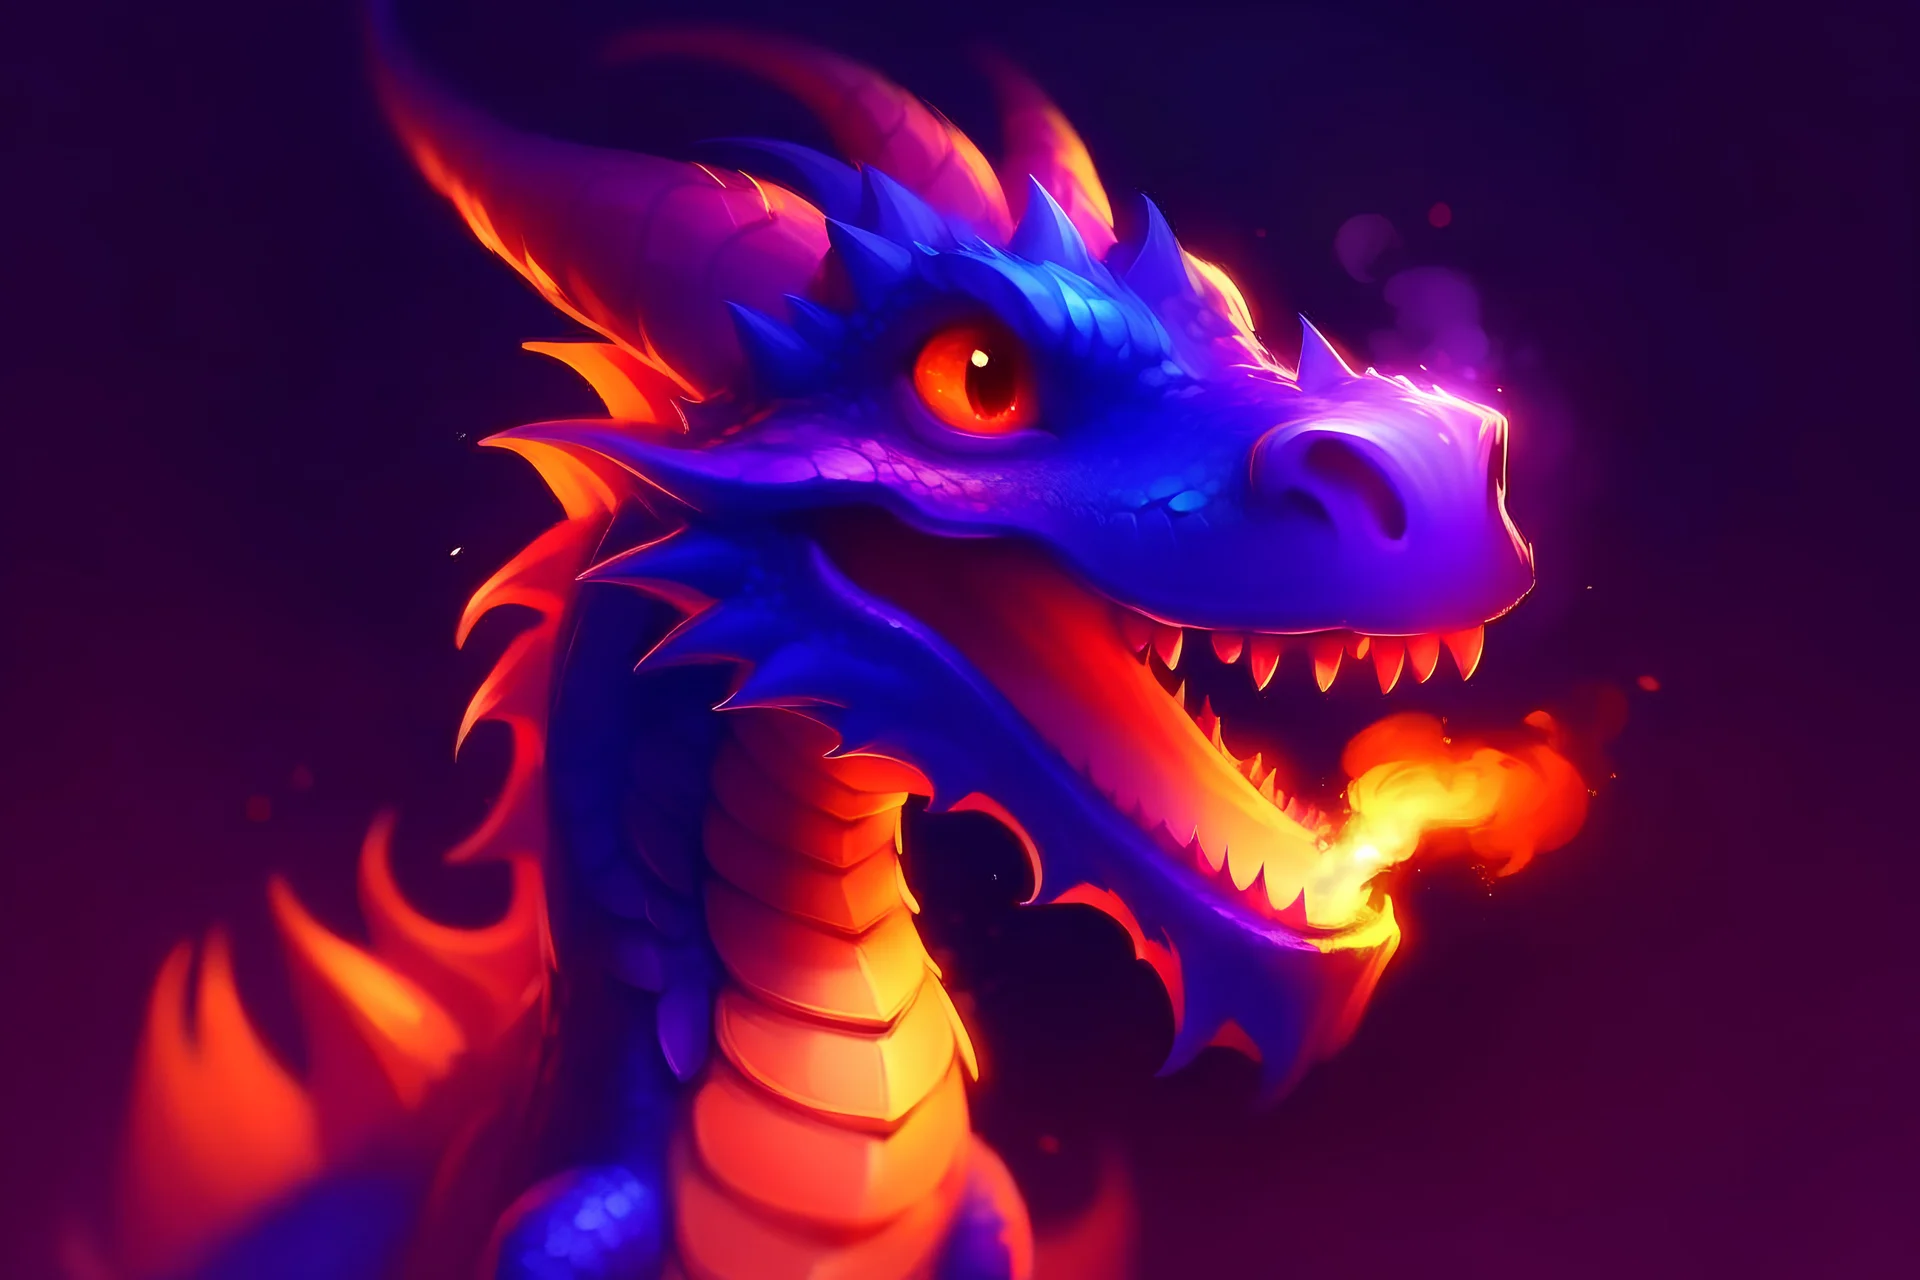 generate a picture of a cute dragon that is purple and fire is coming out of her mouth.